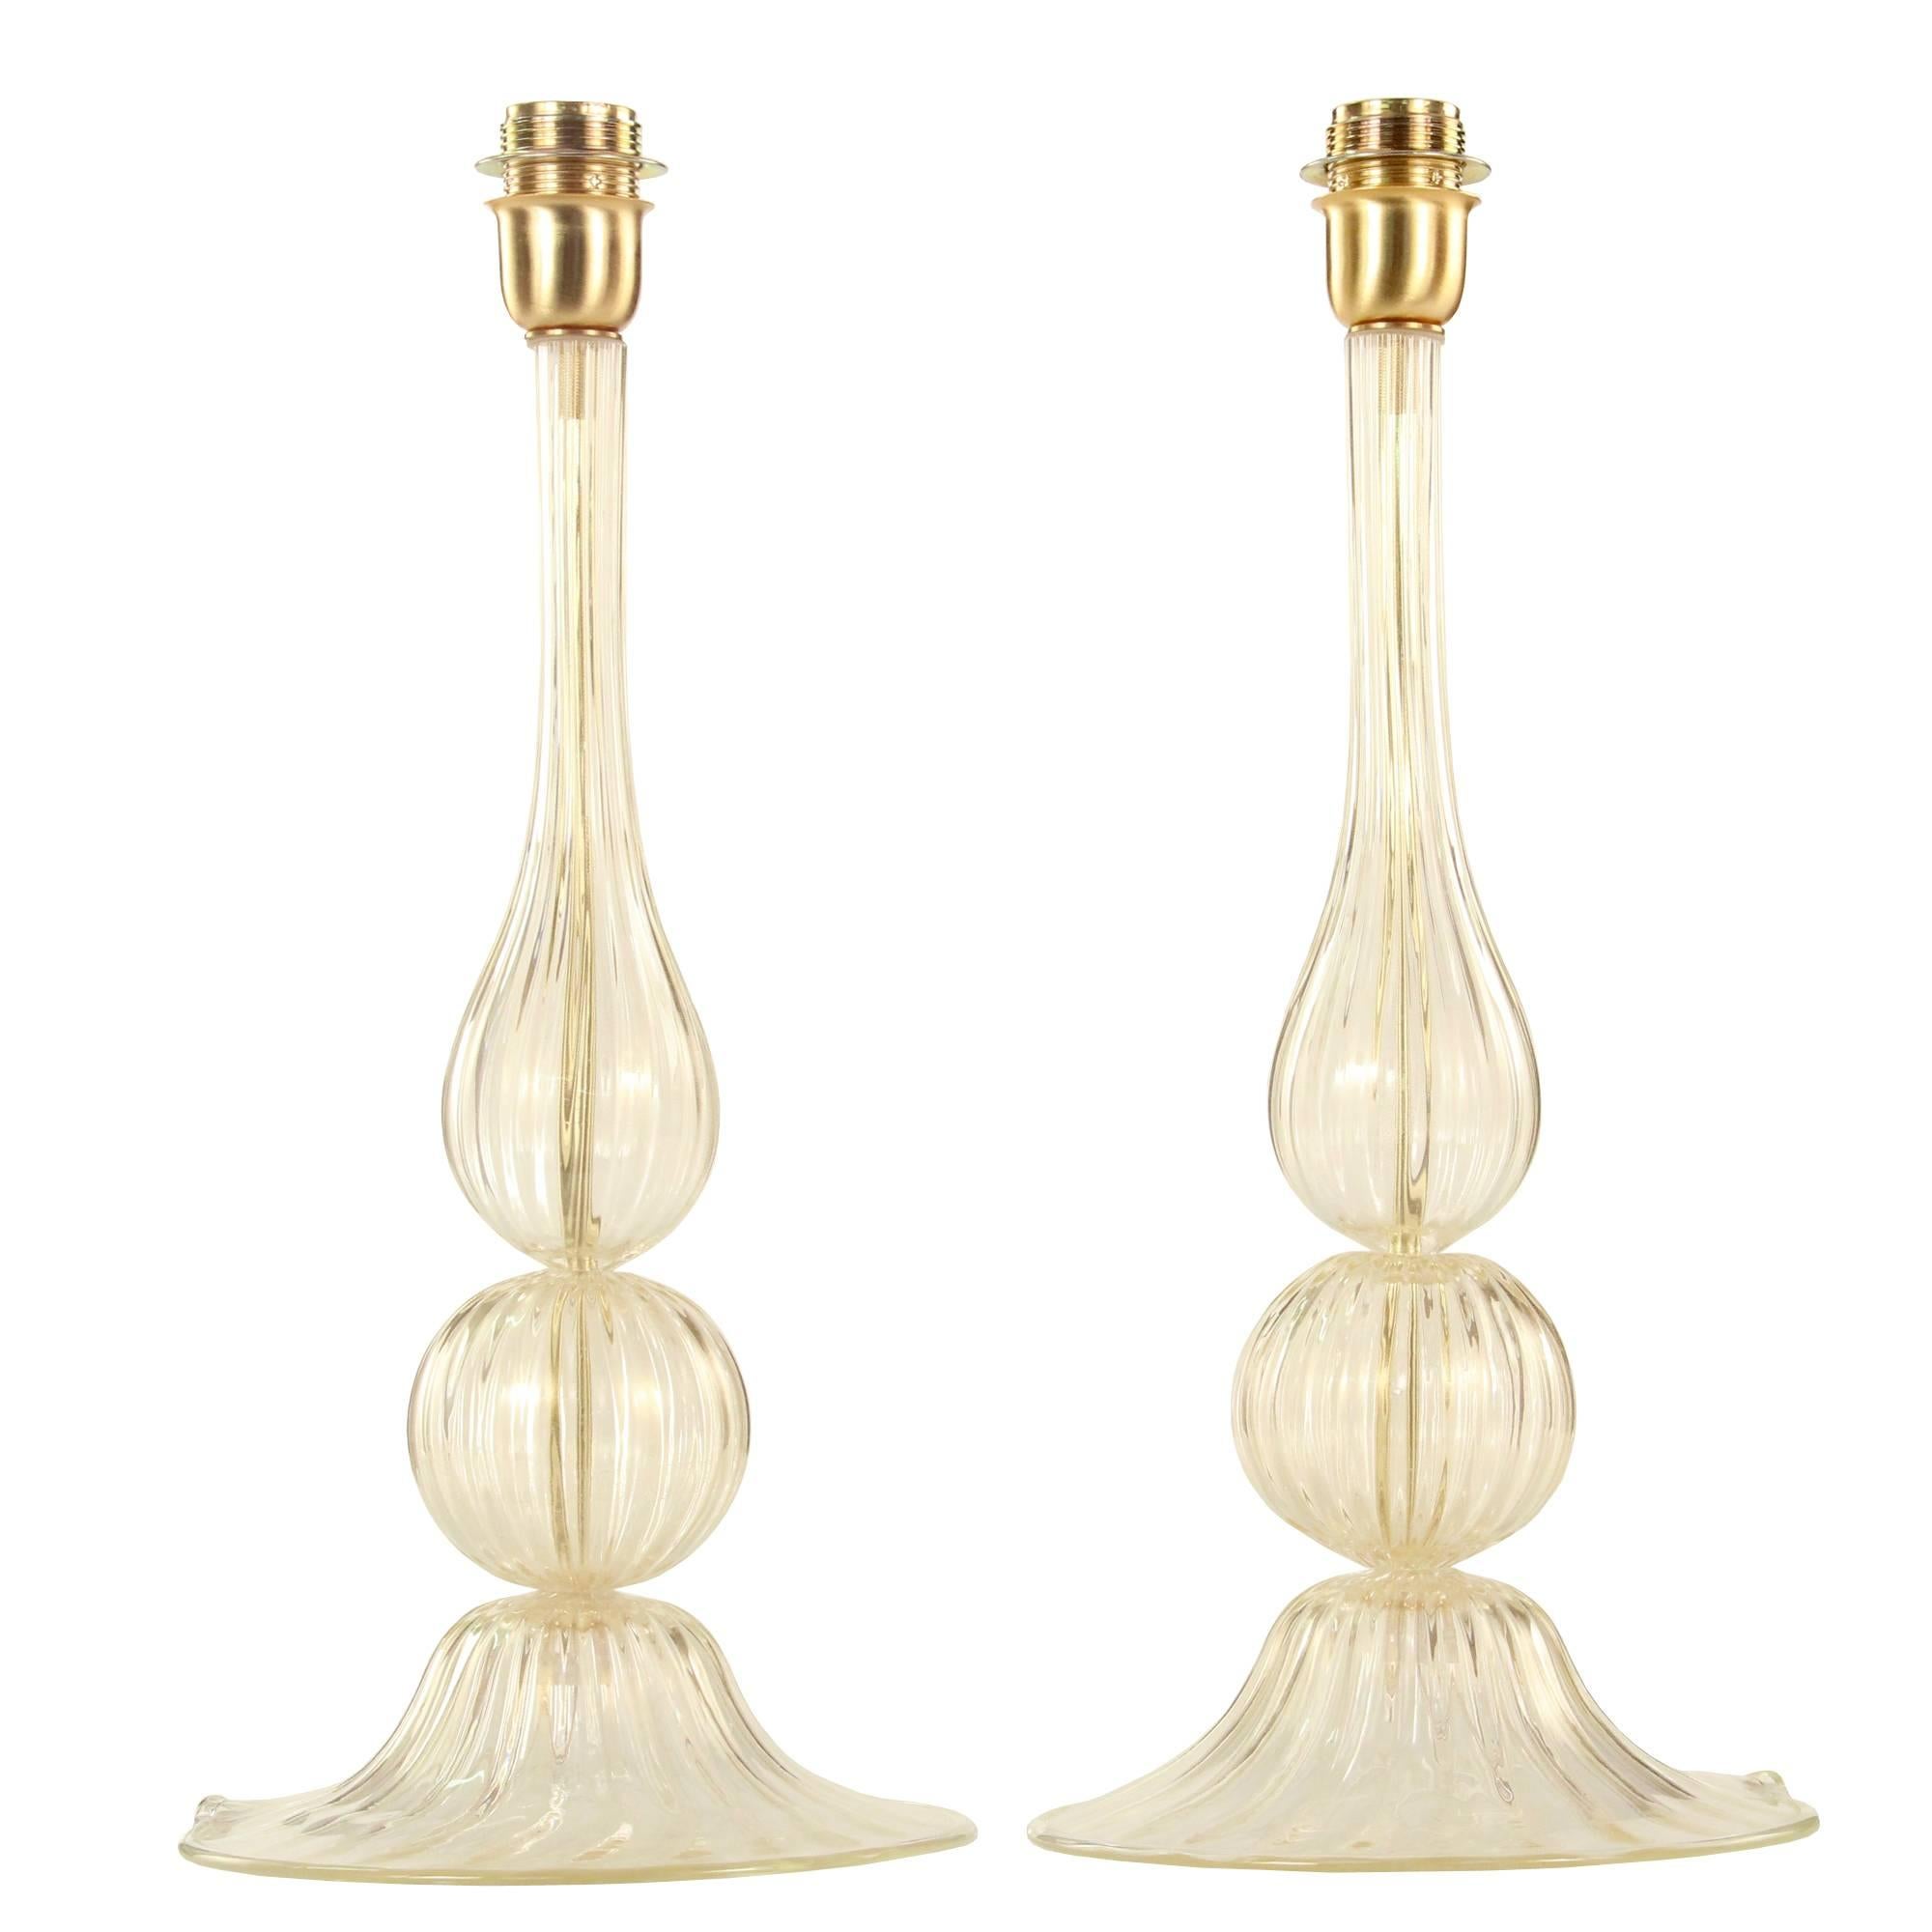 Pair of Italian Murano Blown Glass Table Lamp Infused with 24-Karat Gold Flecks For Sale